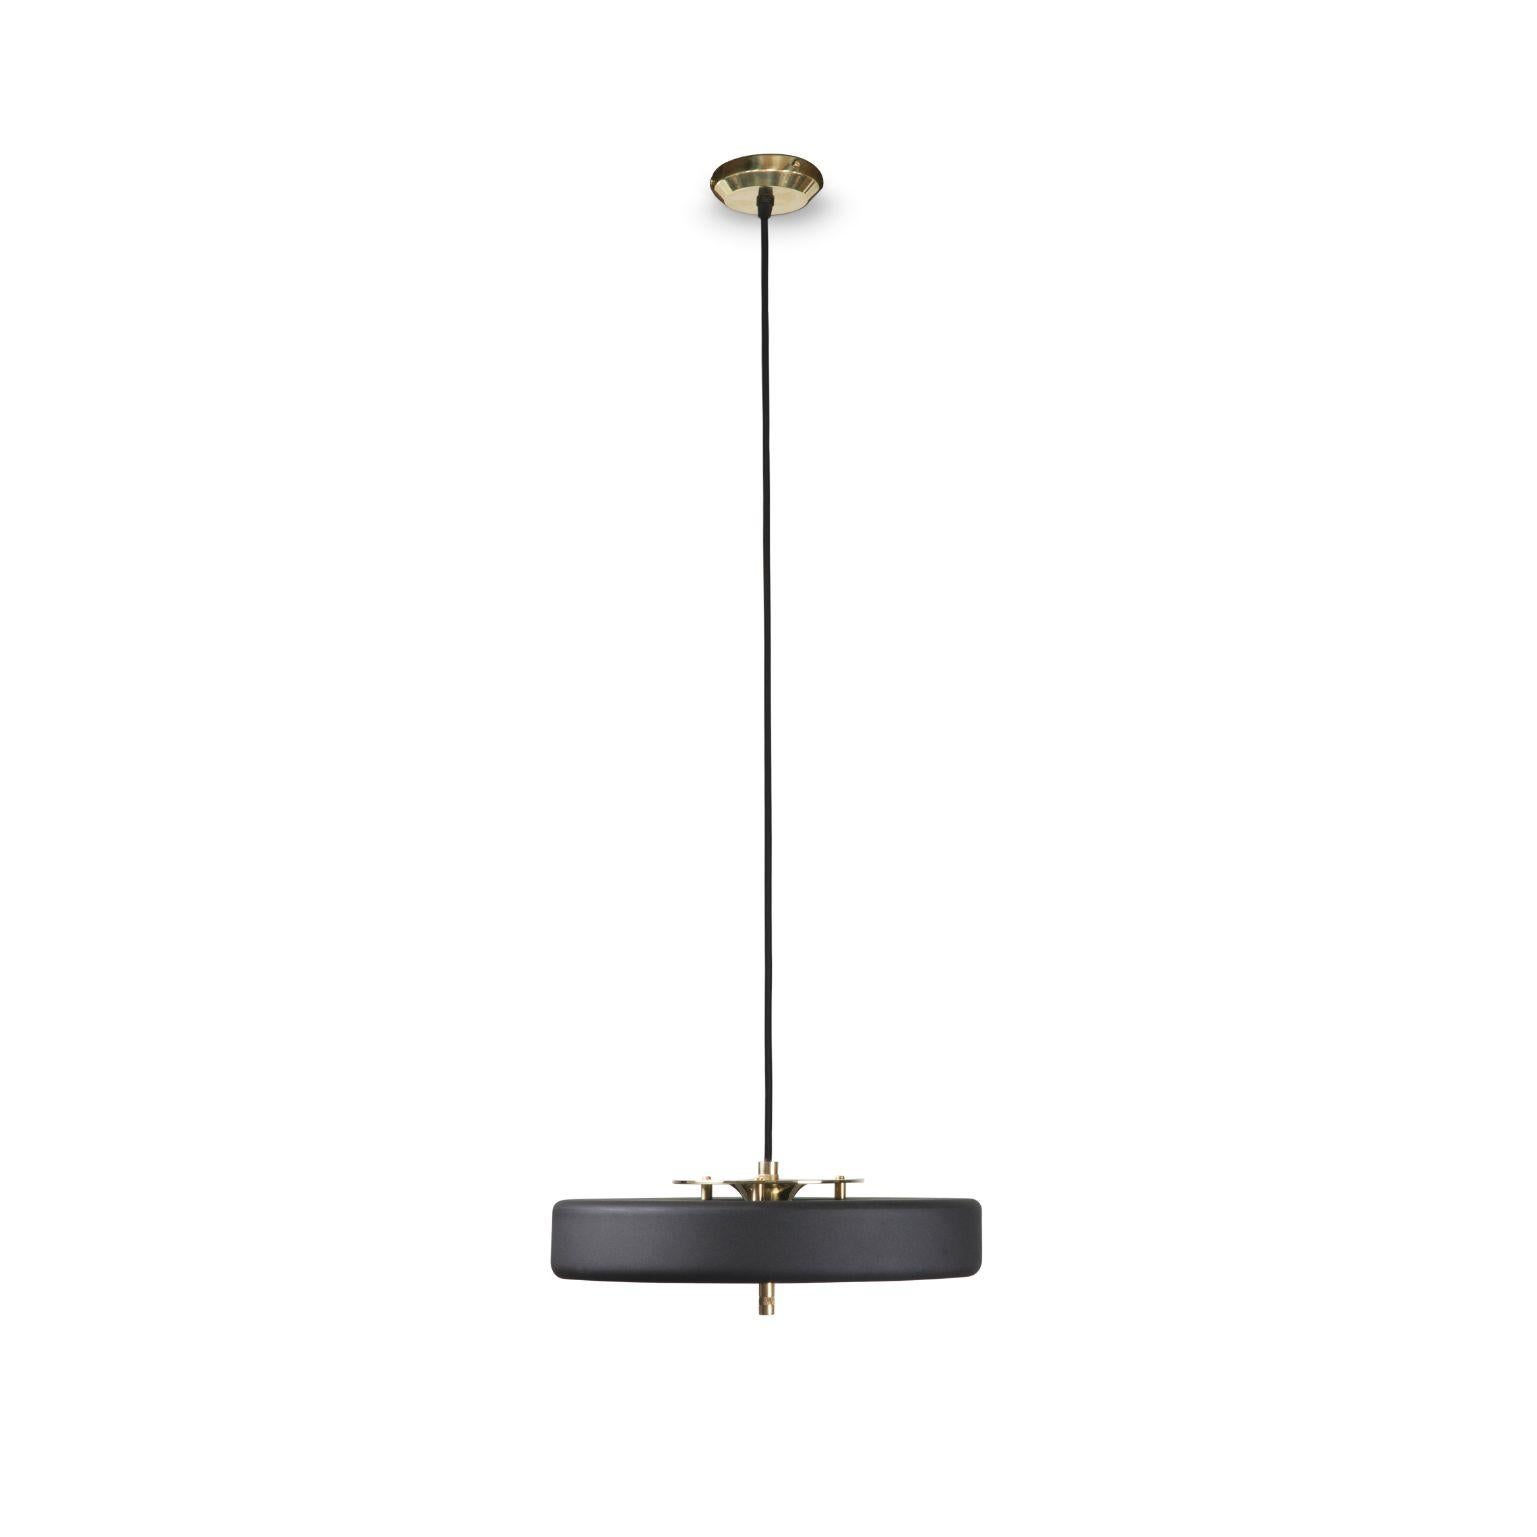 Revolve pendant light - Polished brass - Black by Bert Frank
Dimensions: 60-200 x 35 x 11 cm
Materials: Brass, steel

Also available in brushed brass

When Adam Yeats and Robbie Llewellyn founded Bert Frank in 2013 it was a meeting of minds and the